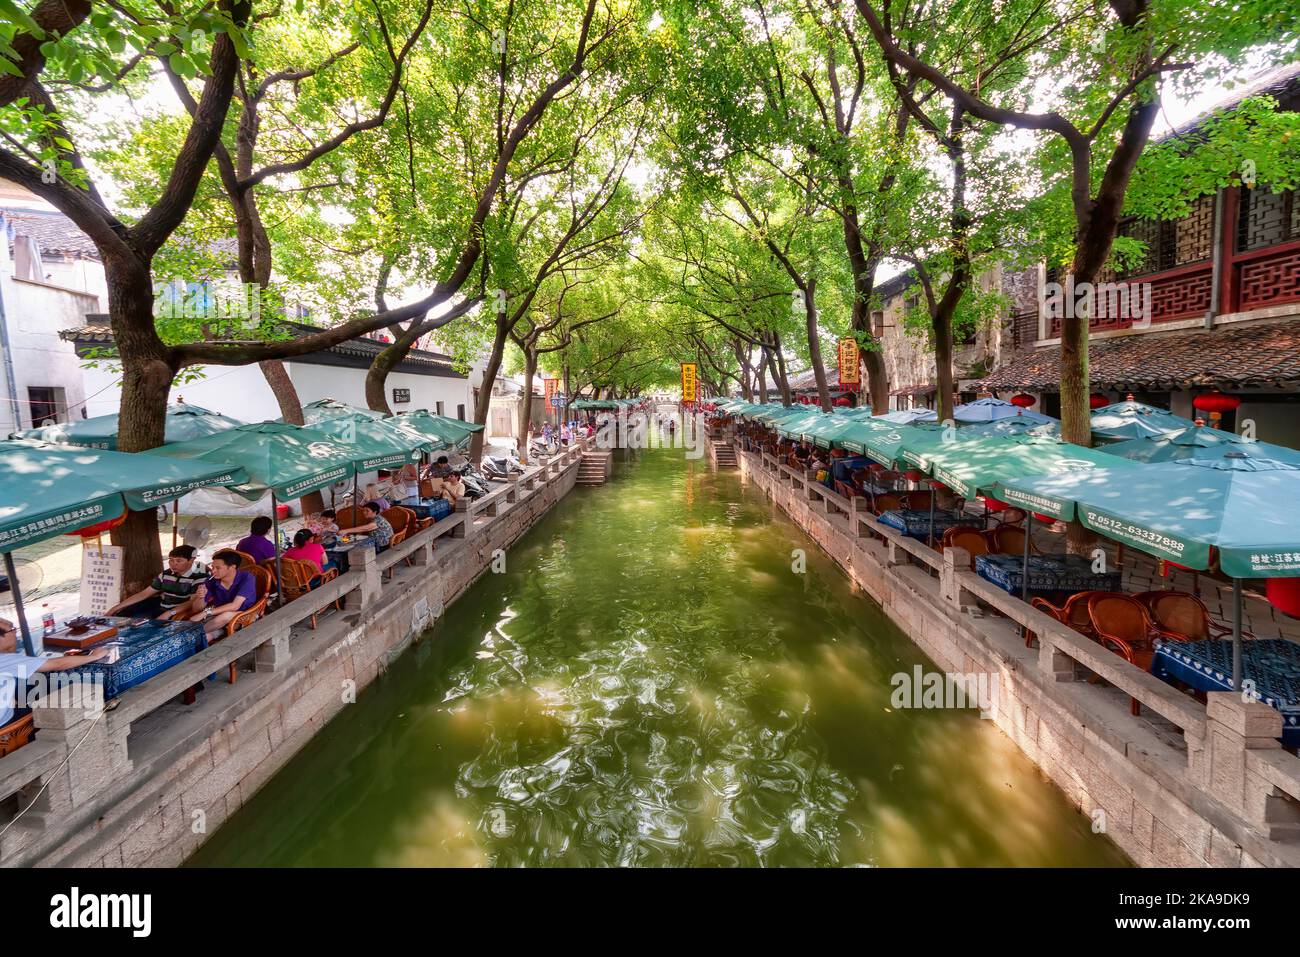 Tongli, China - August 13, 2011:  One of the many canals in Tongli with people sitting at restaurant tables. Tongli It is known for a system of canals Stock Photo